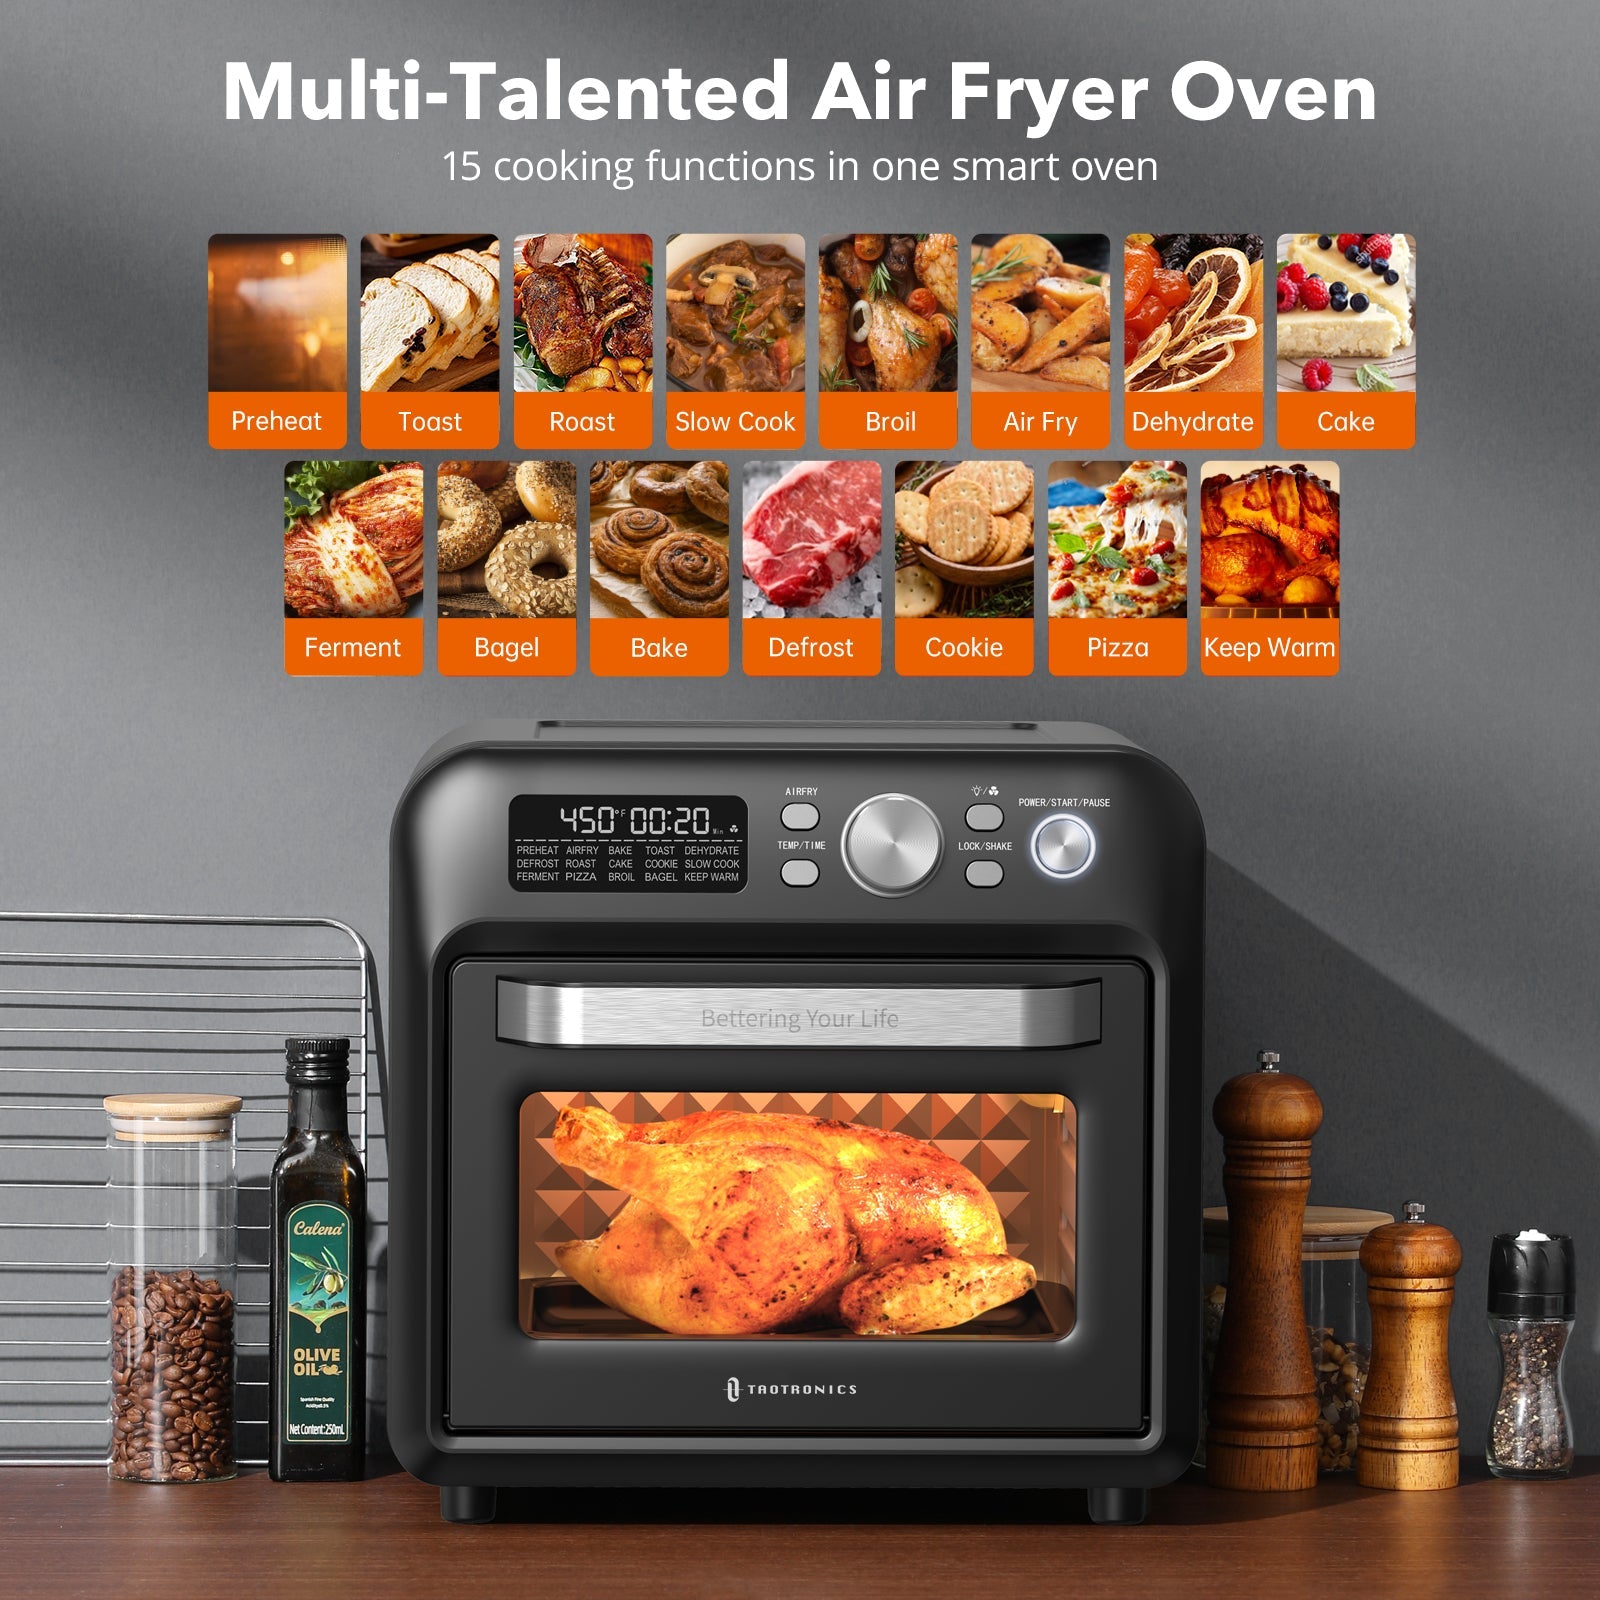 12 Liter Digital Air Fryer Oven with Tuya WiFi - China Air Fryer